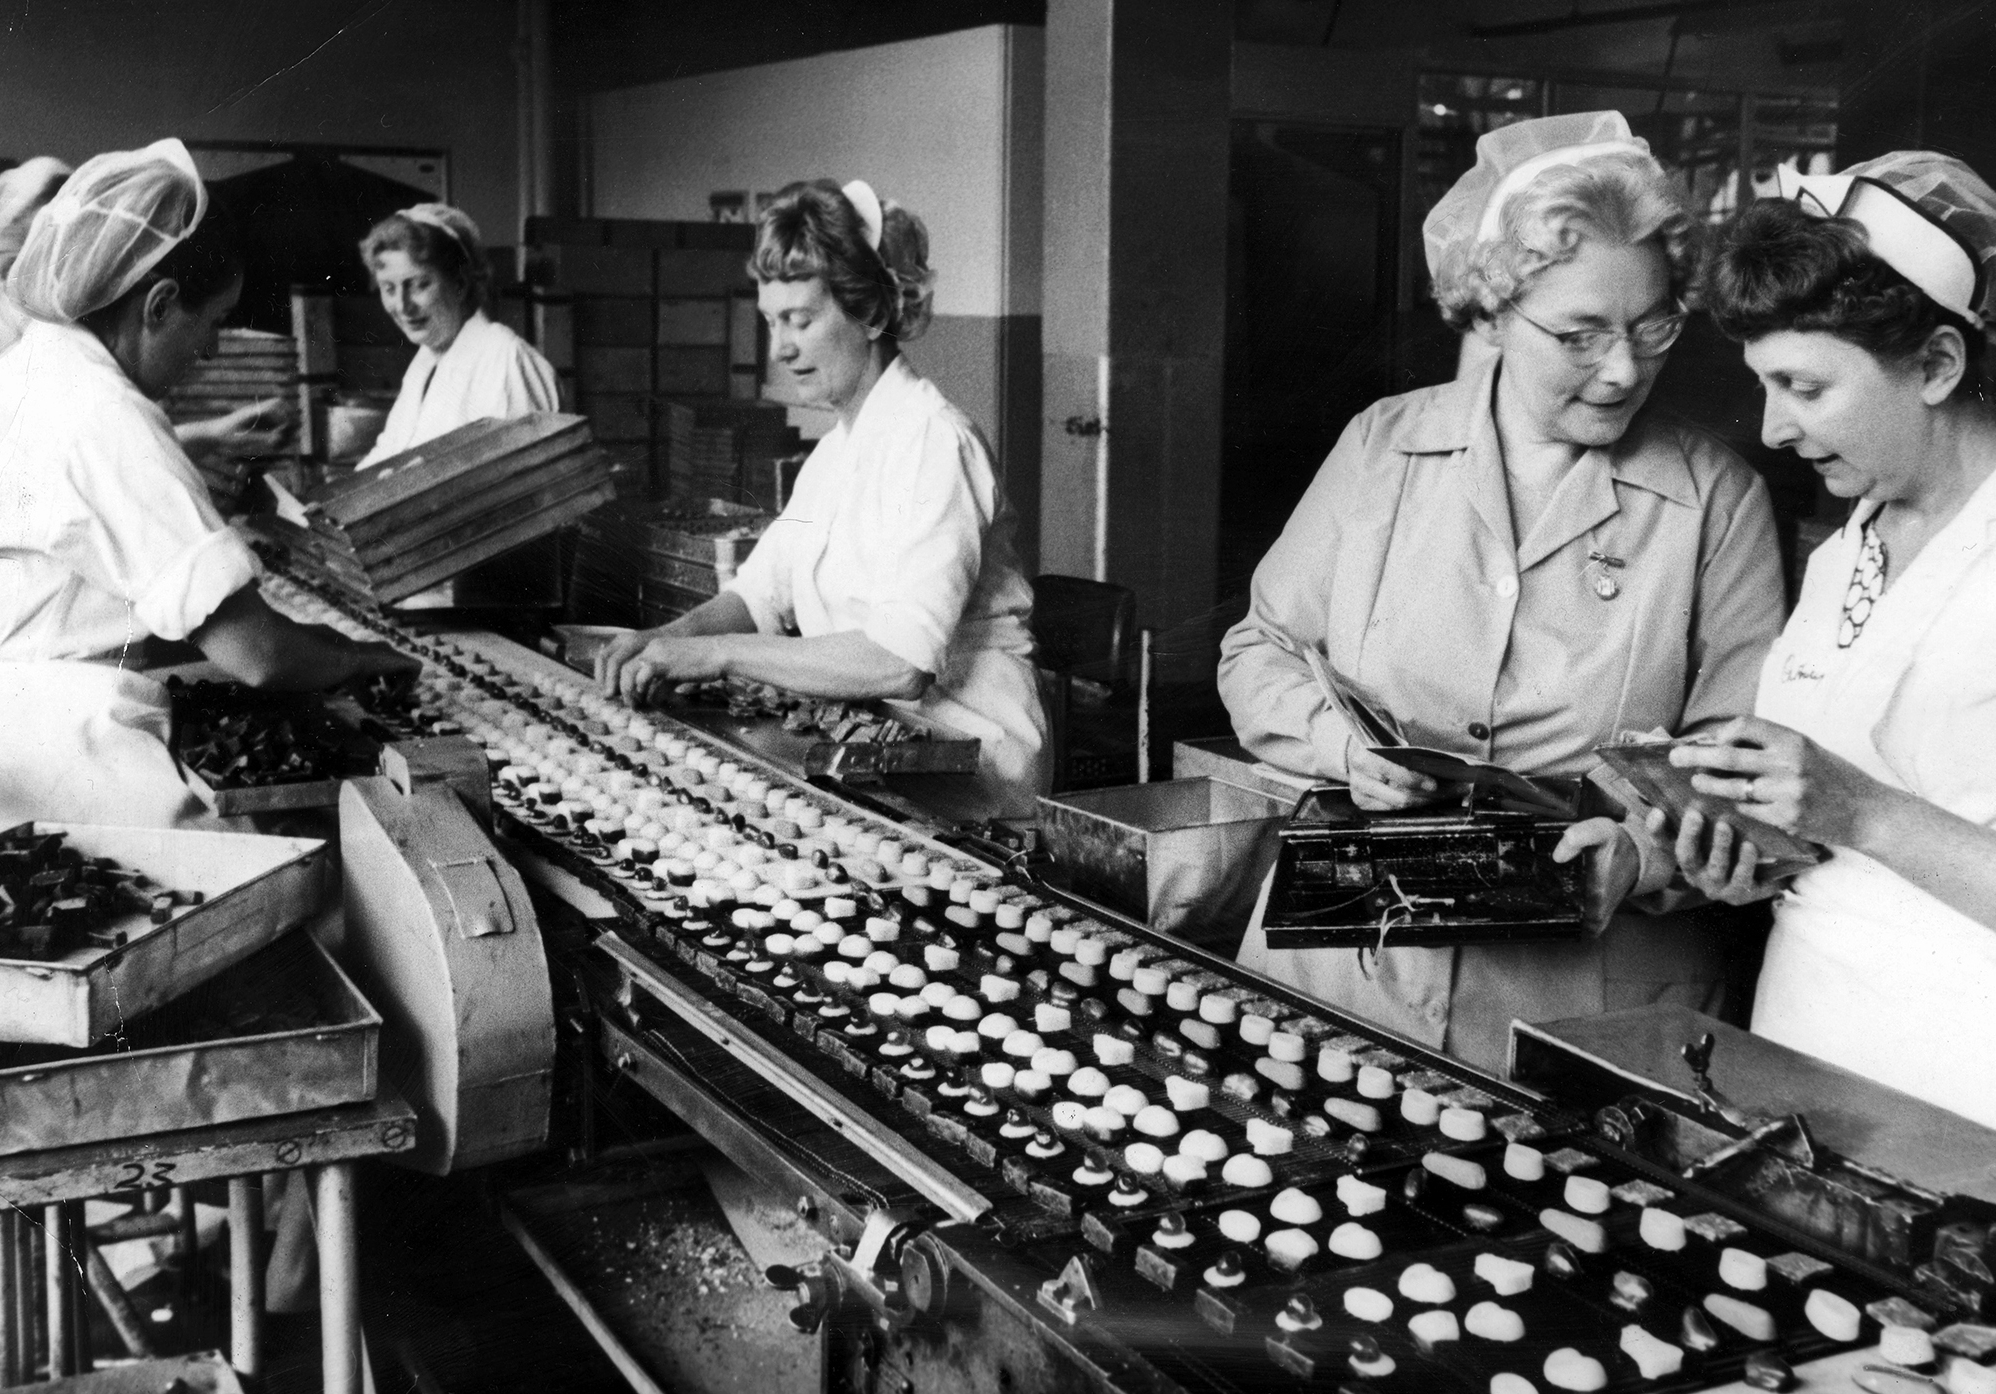 It was Cadbury that first linked Valentine's Day with those heart-shaped boxes filled with chocolates nestled in lace doilies. Here, women work on a production line at Cadbury's in England in 1966.